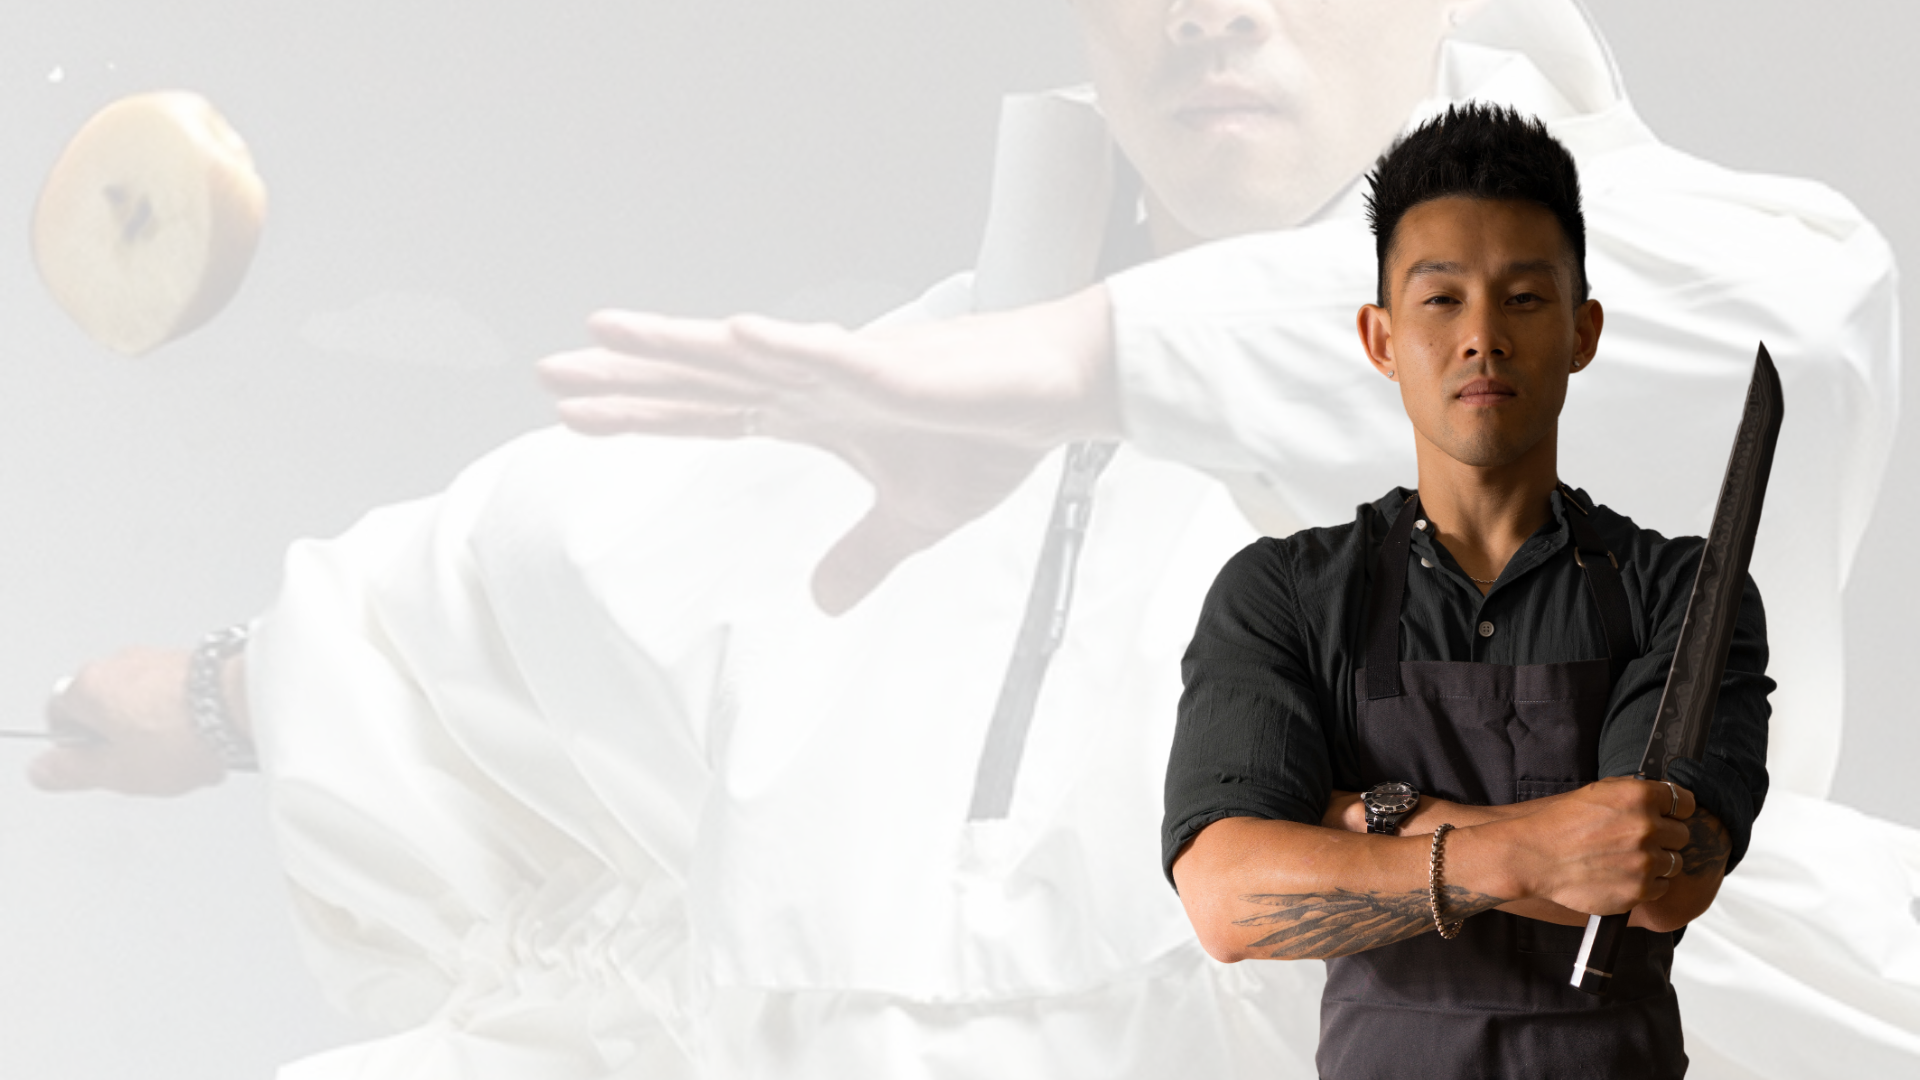 August 17 & 18</br>Wallace Wong “Knife Skills 101: How To Use A Knife Like A Chef“